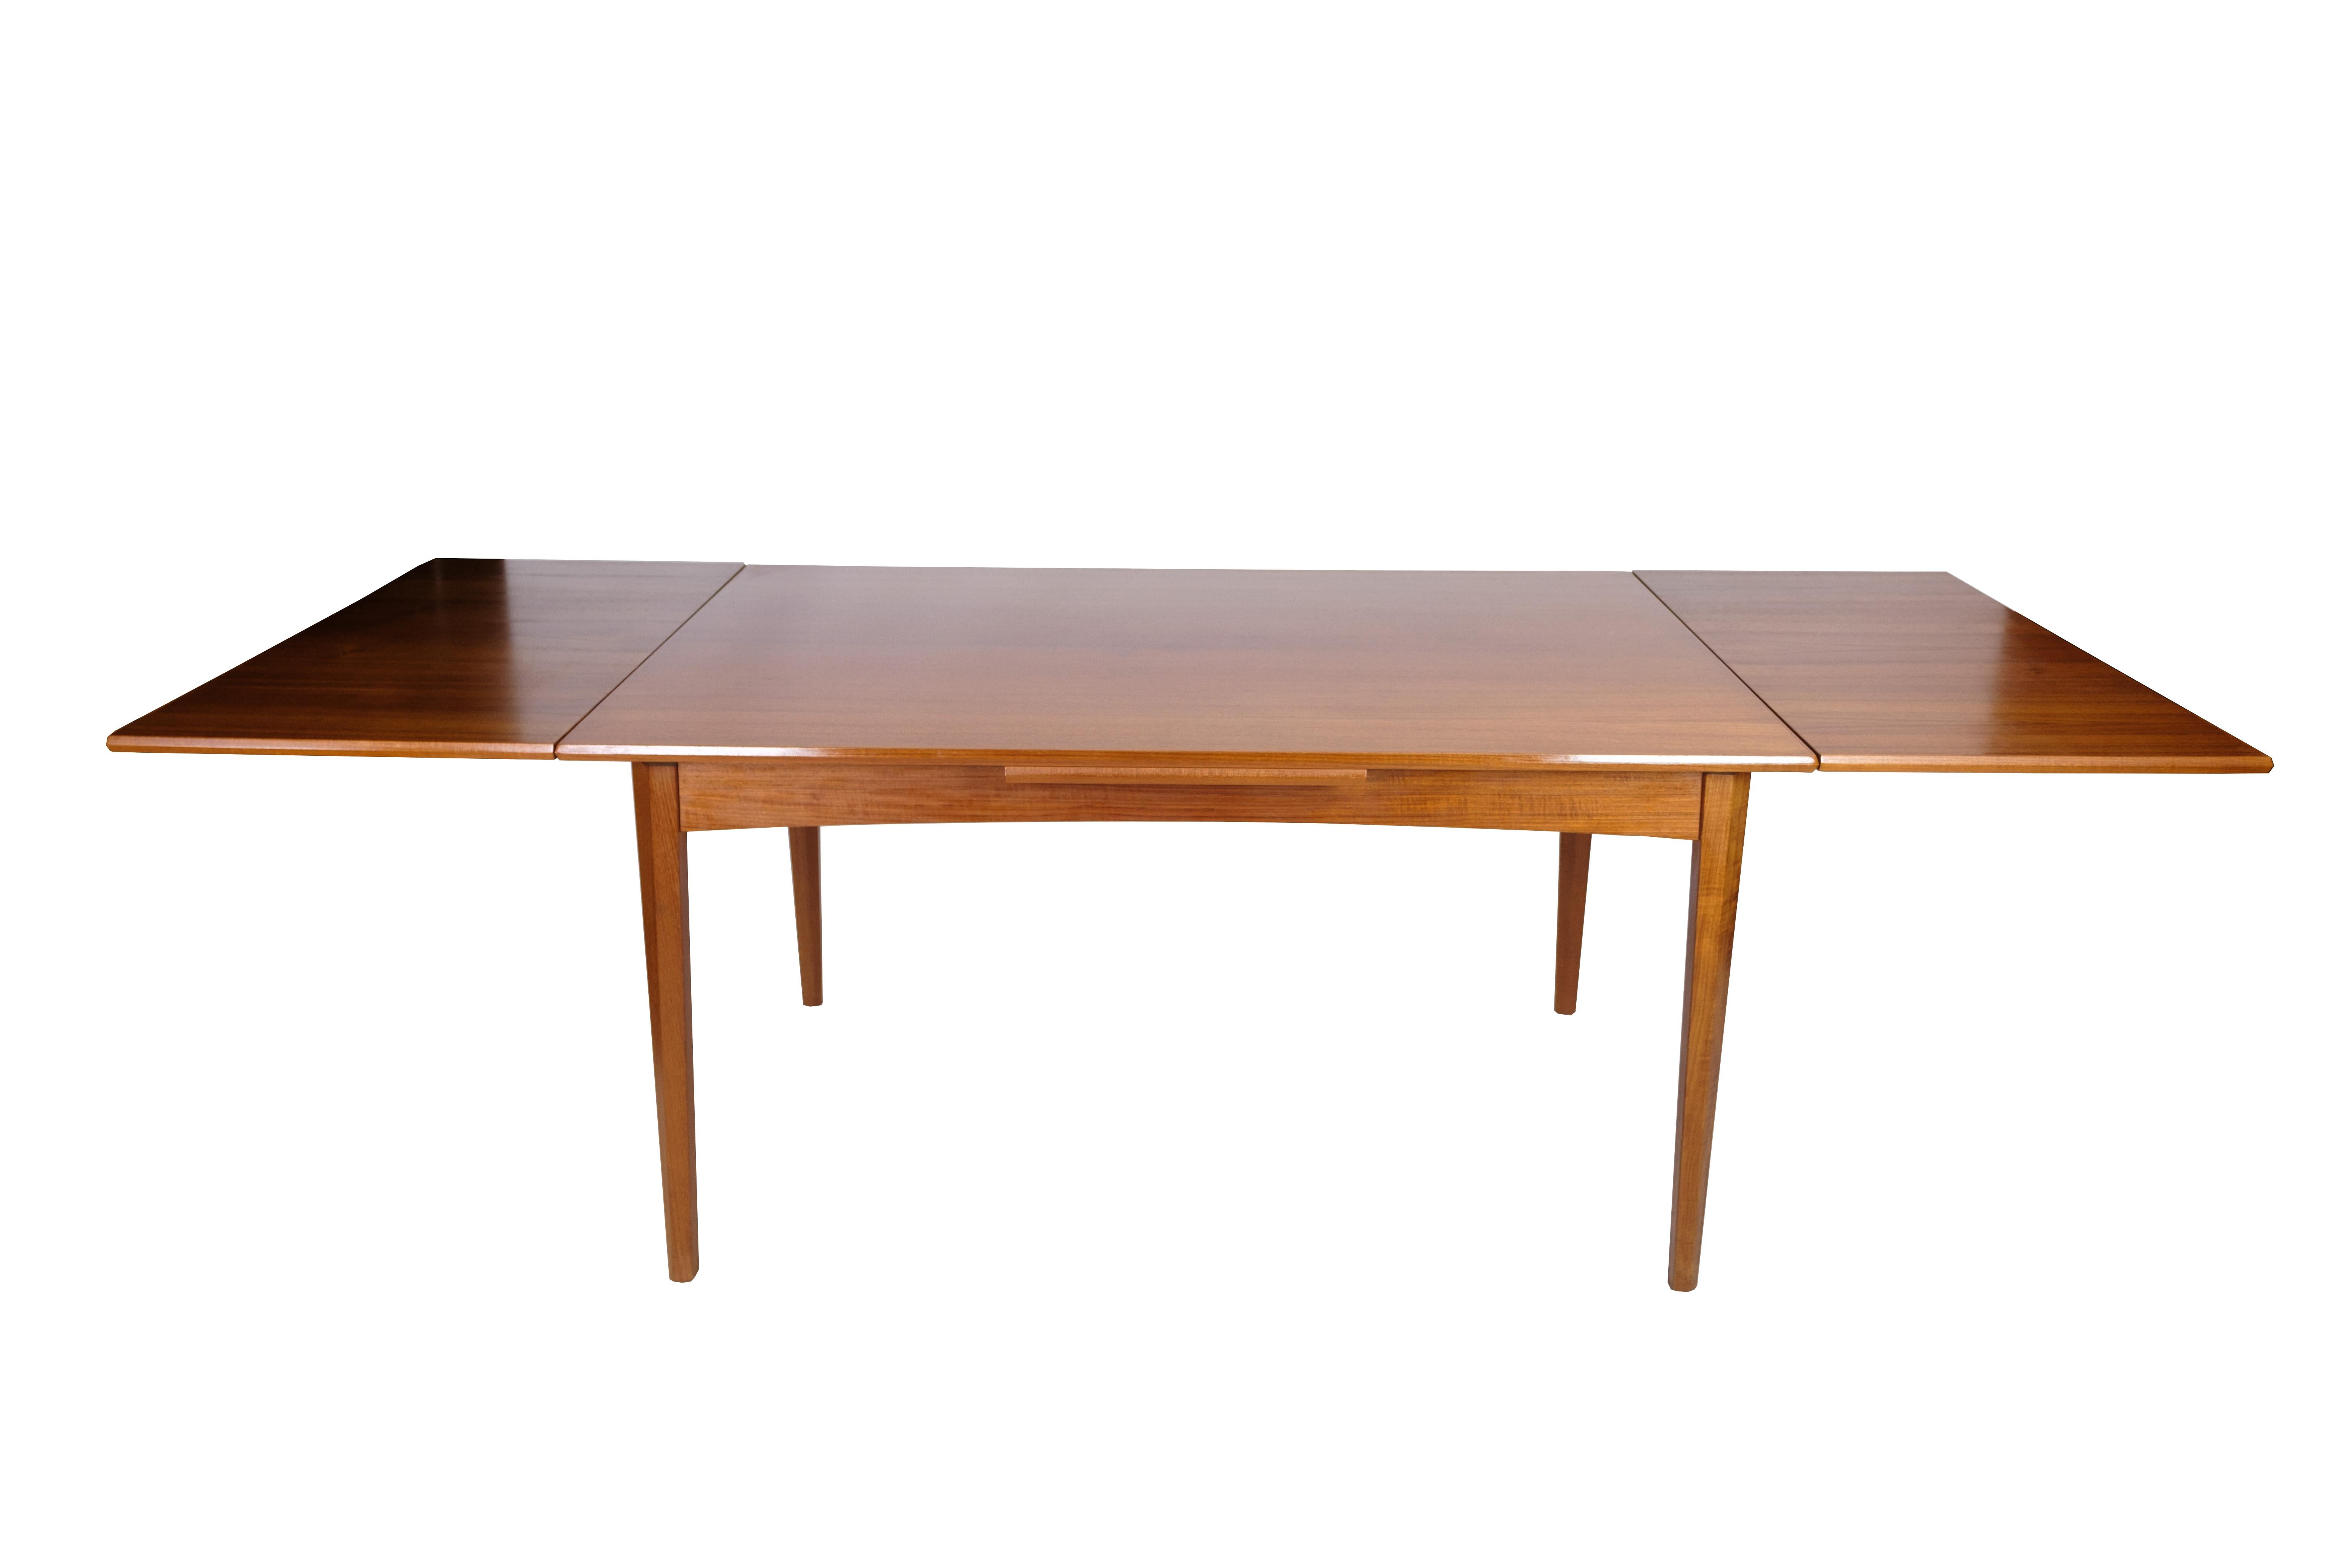 This dining table in teak is a beautiful and functional piece of furniture in Danish design from the 1960s. The table is made of high-quality teak wood, which is known for its durability and natural beauty. The design includes a Dutch extension,